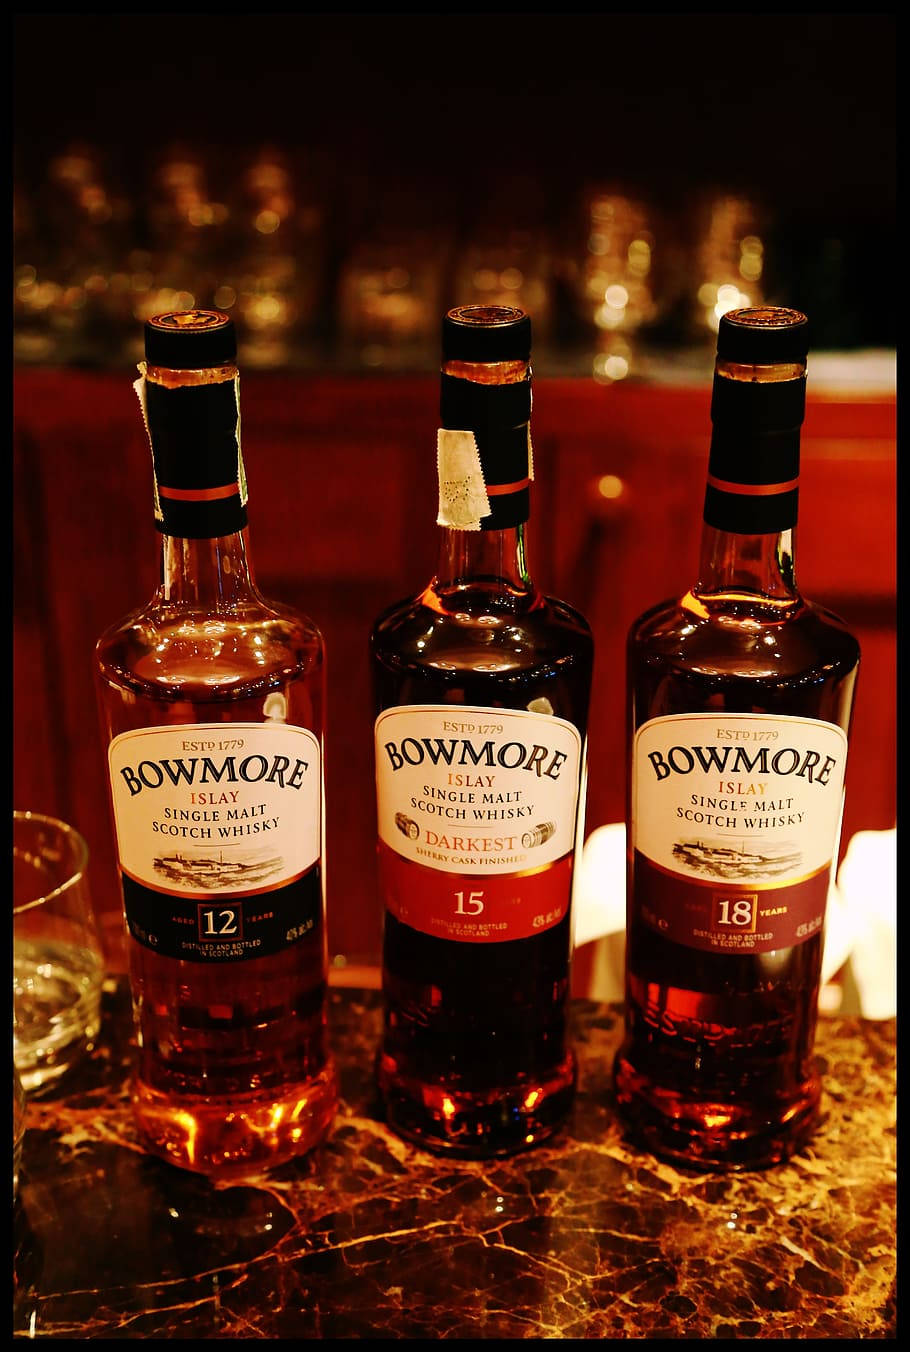 Bowmore 12 15 Darkest 18 Years Old Whisky Collection Wallpaper